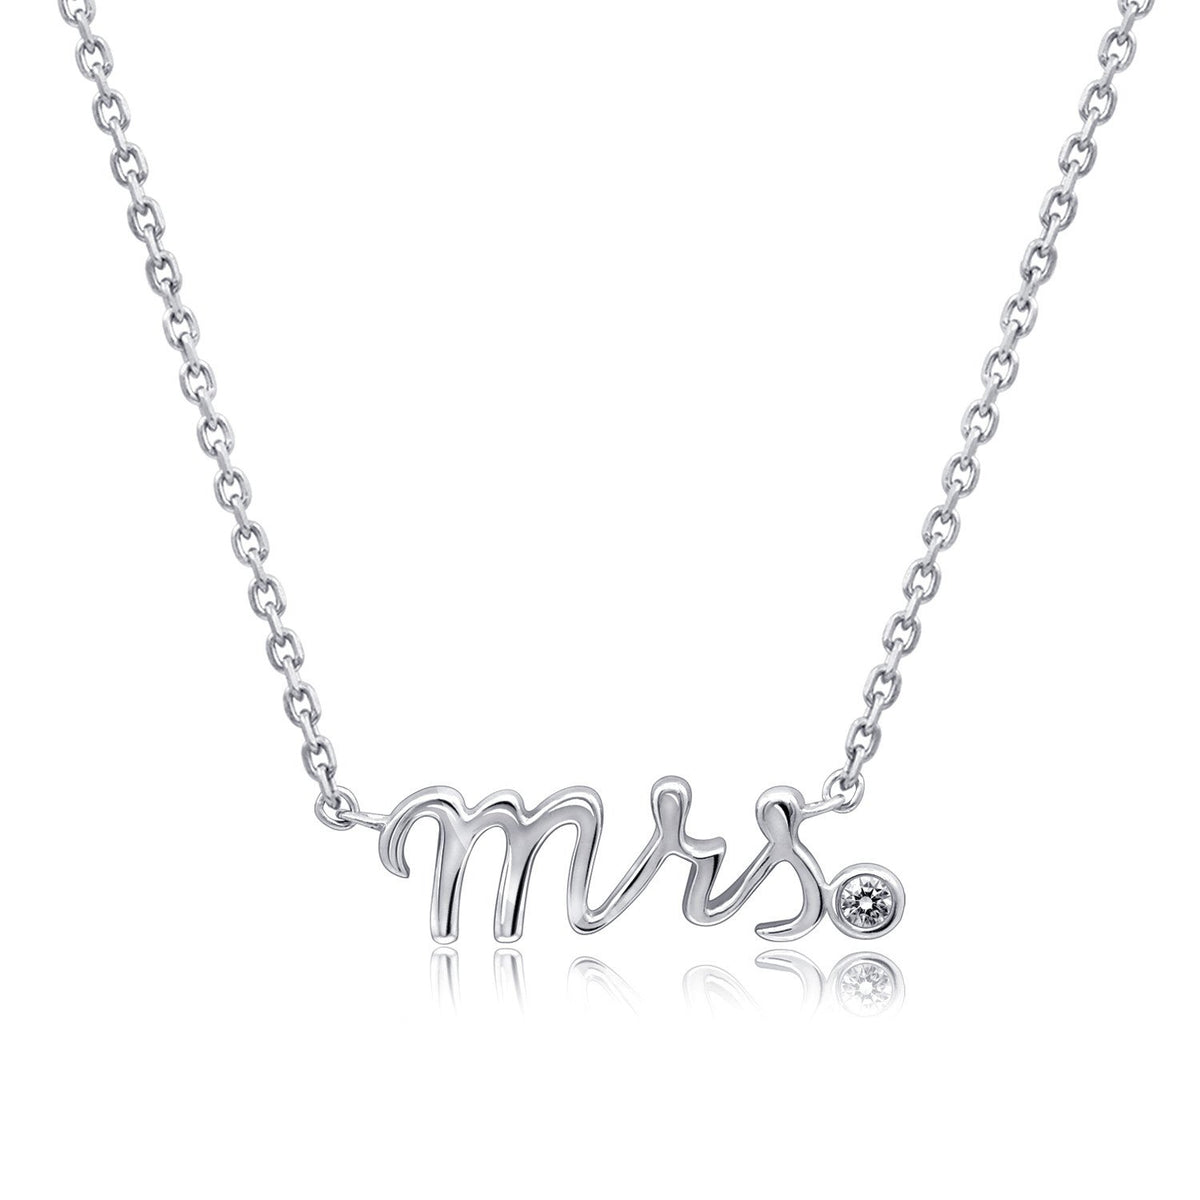 "Mrs." Nameplate Necklace